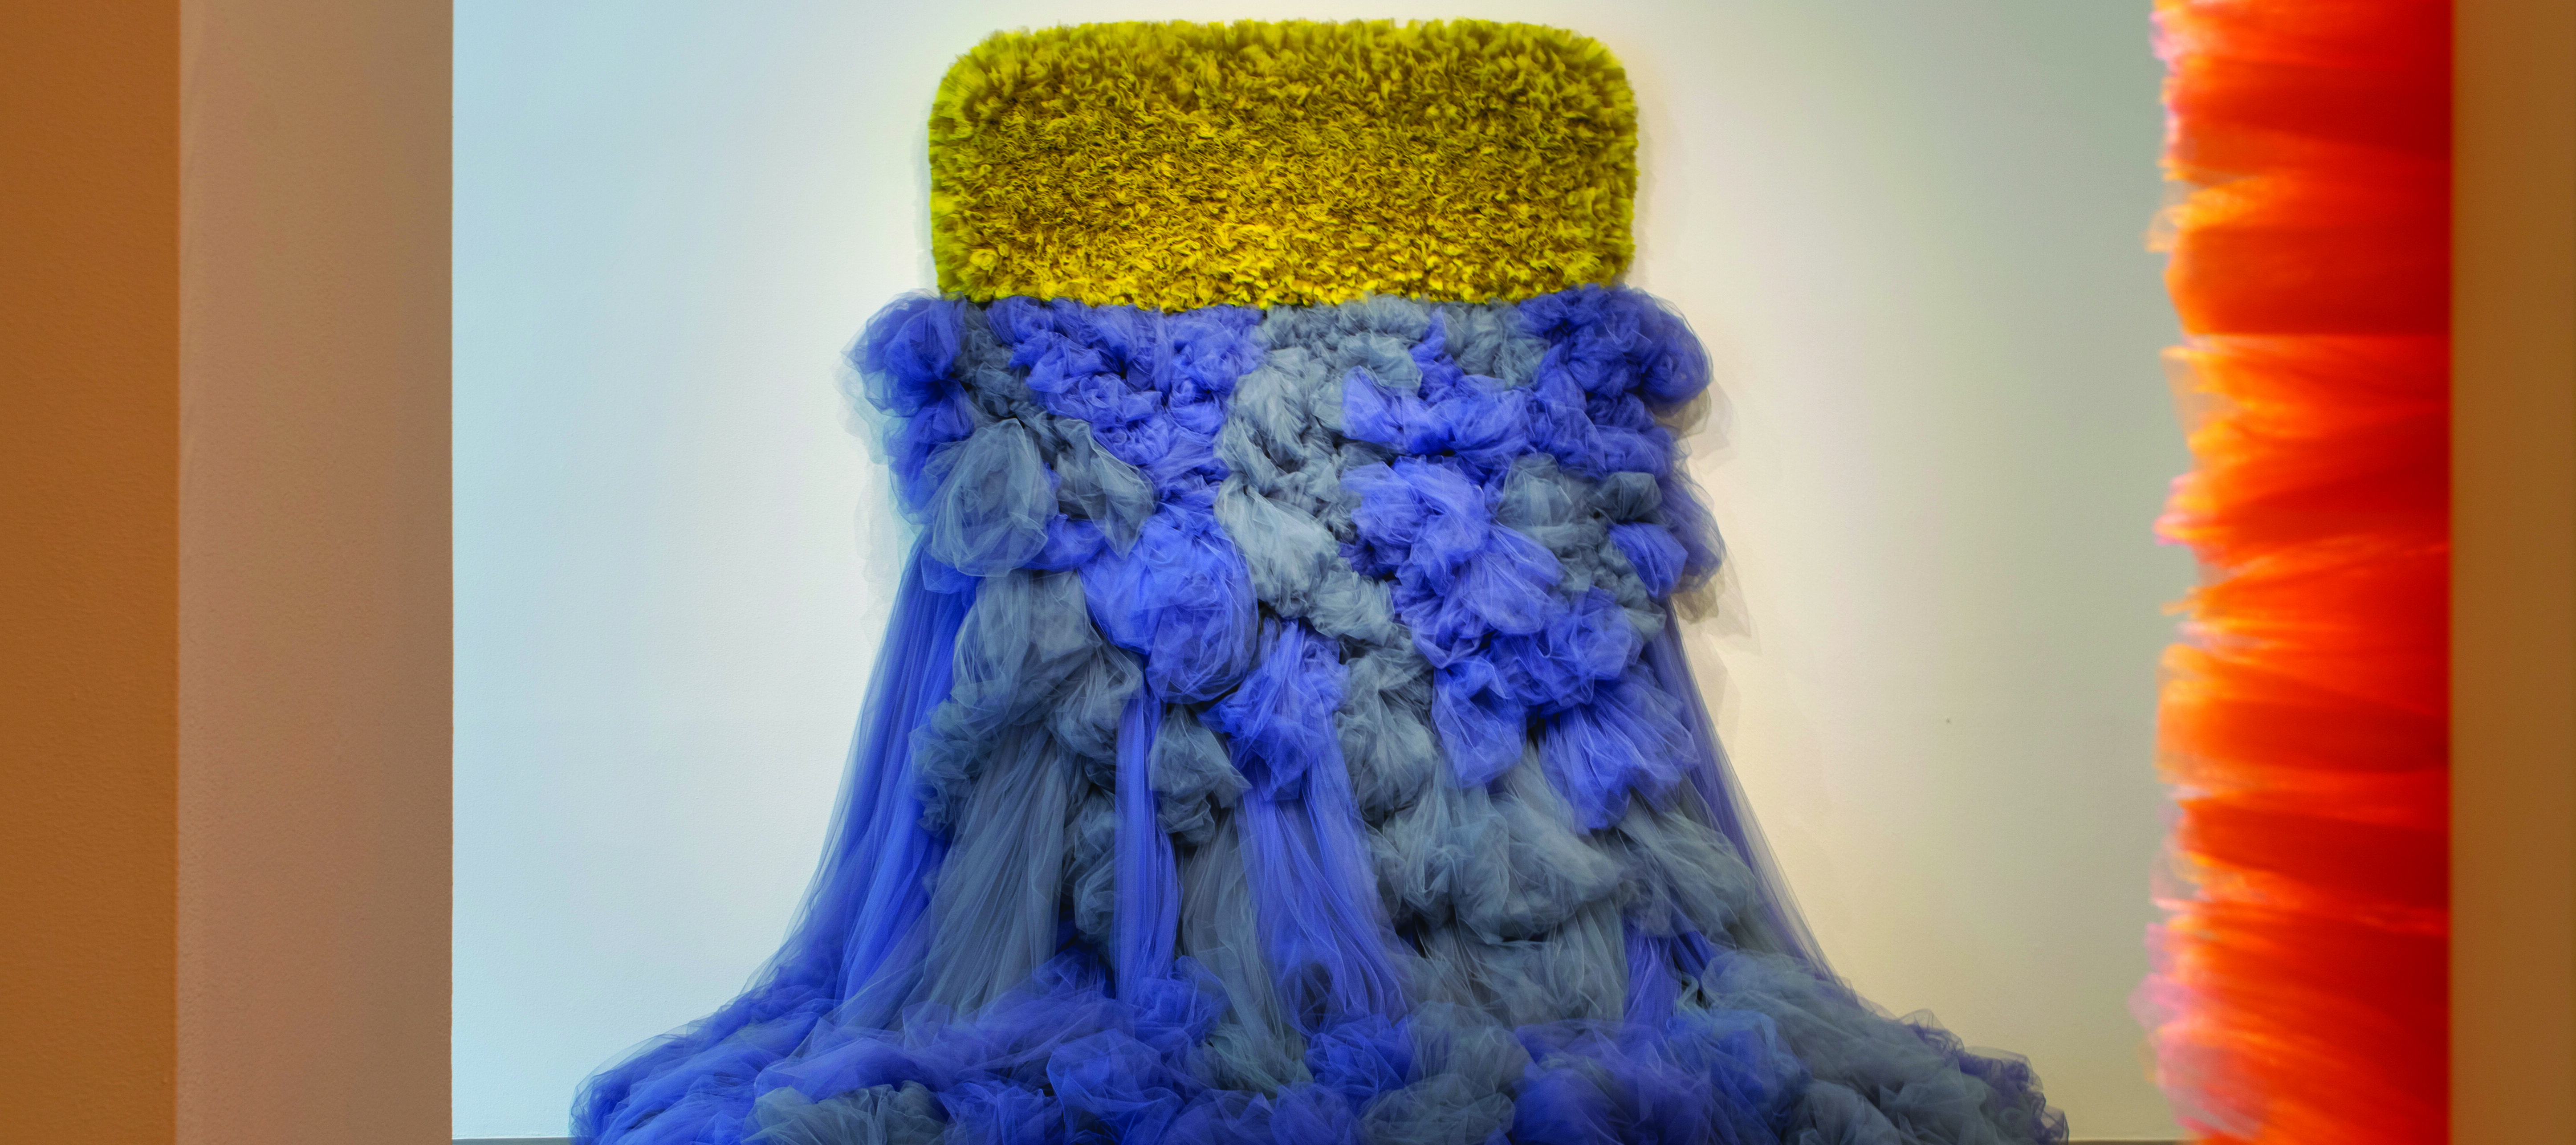 An abstract sculpture made of tulle fabric protrudes from a white wall. The sculpture has two different halves: the tulle on the upper half is cropped close, in a yellow-green horizontal rectangle. The tulle on the lower half is blue-grey, and spills out from the wall onto the floor, like a dress.